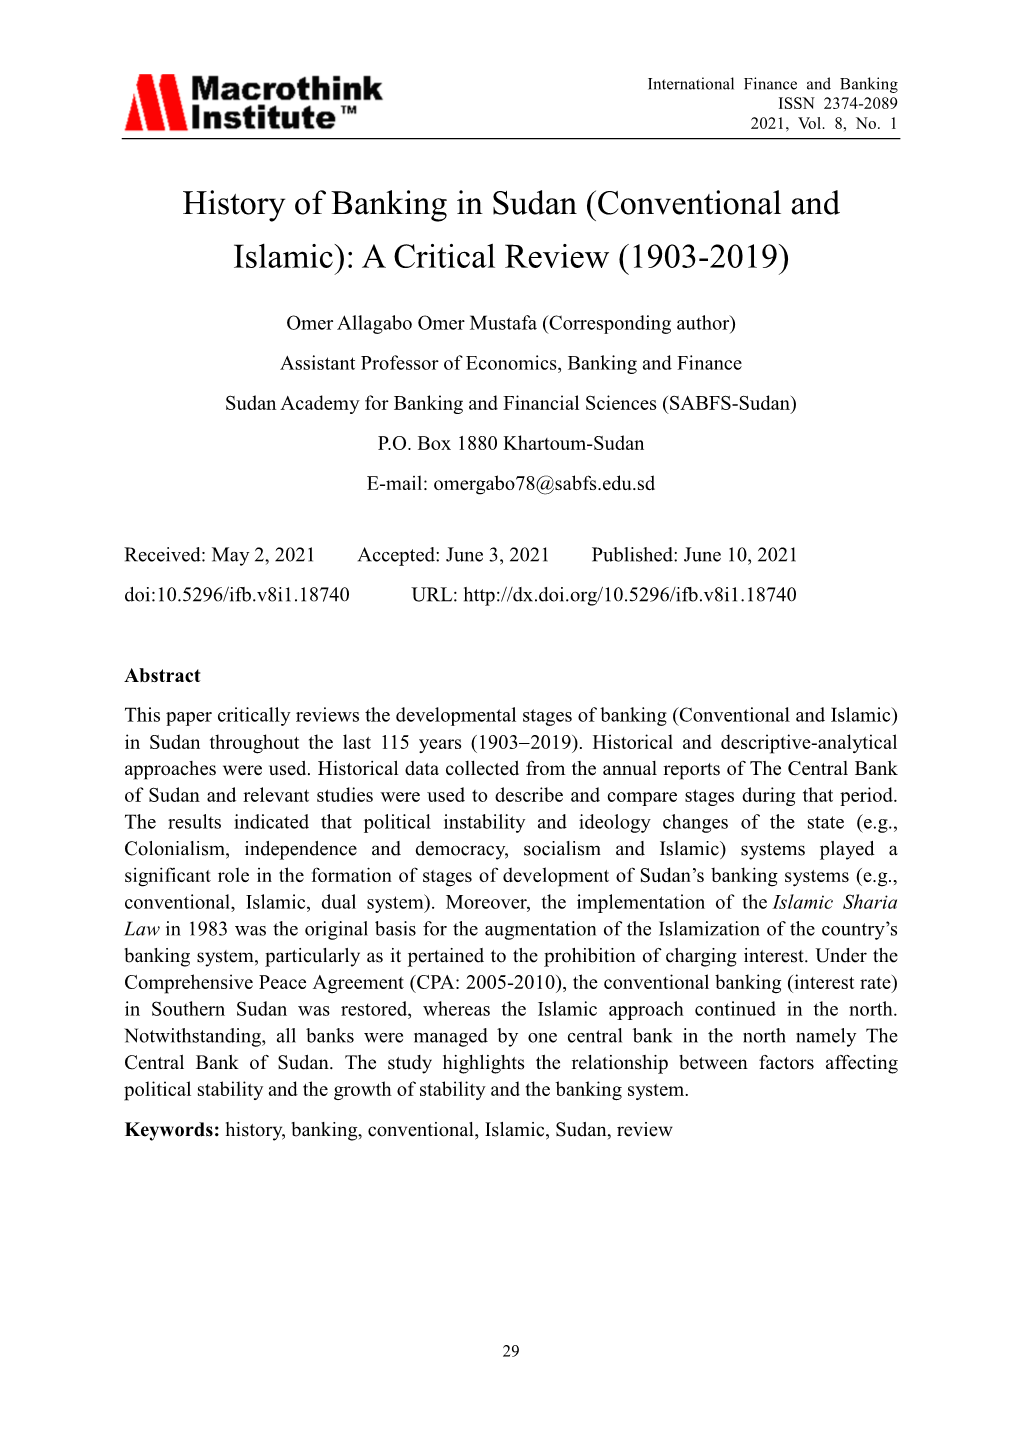 History of Banking in Sudan (Conventional and Islamic): a Critical Review (1903-2019)